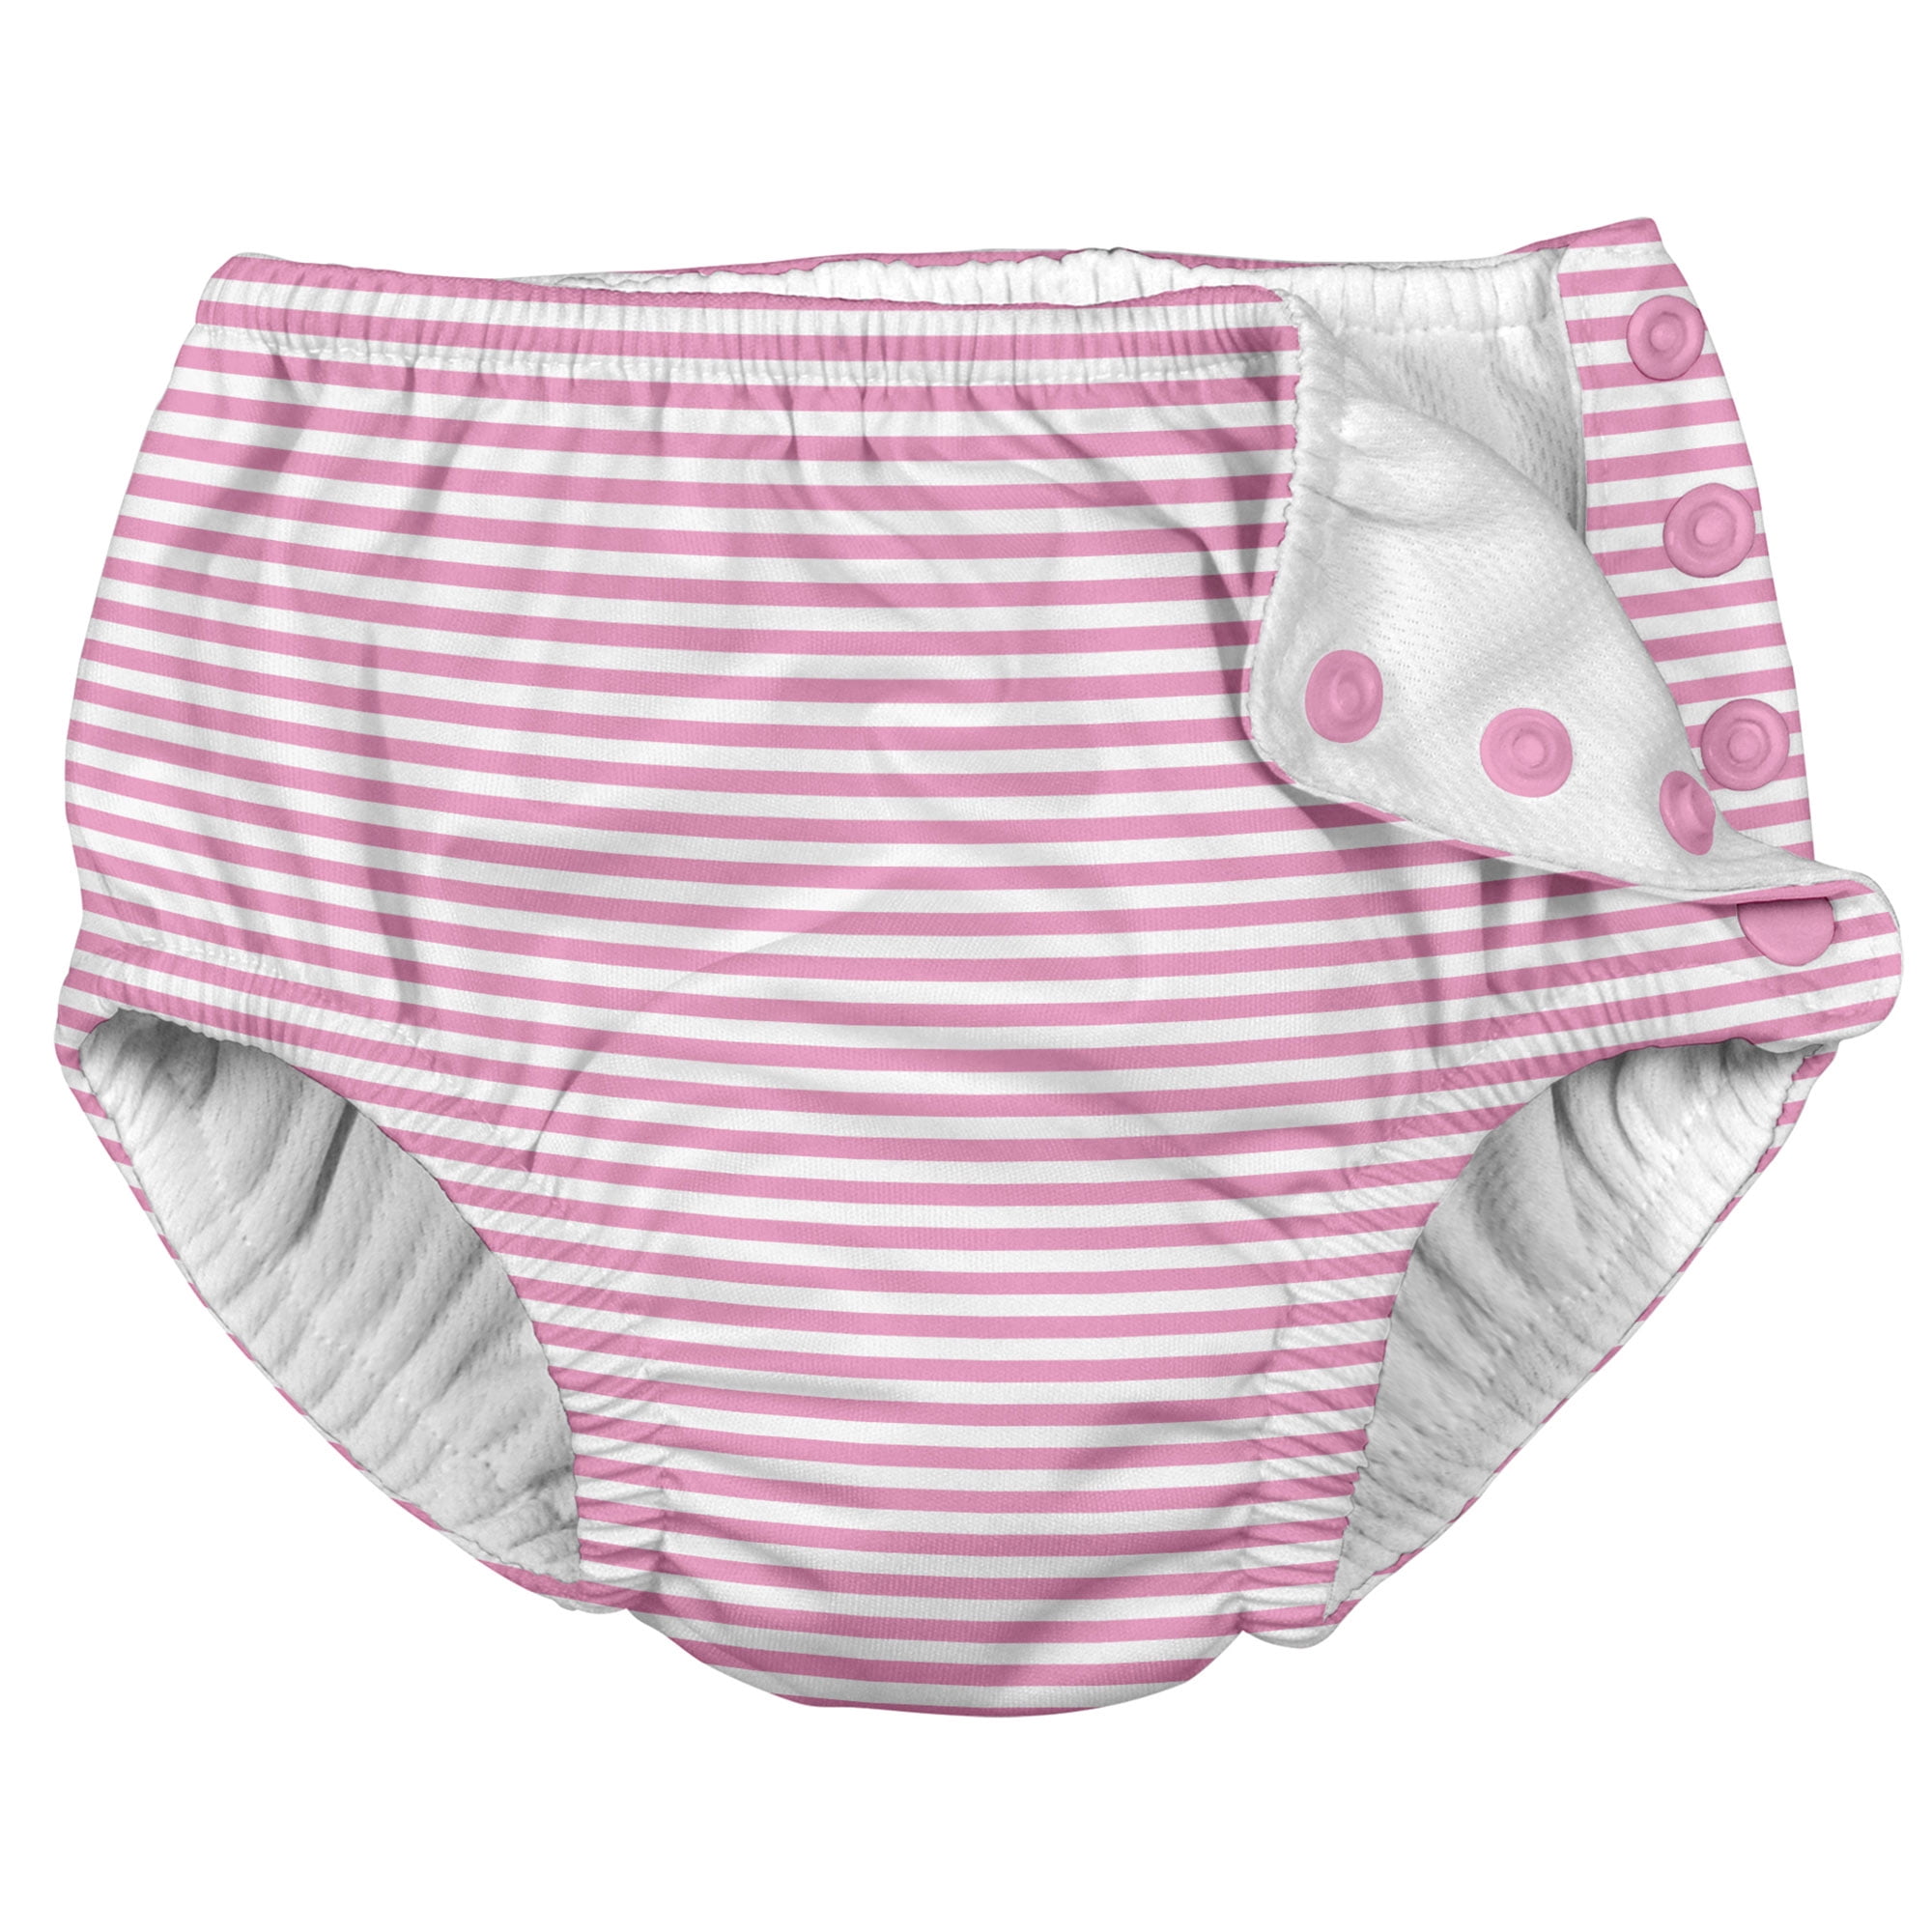 i play Unisex Reusable Absorbent Baby Swim Diapers - Swimming Suit Bottom |  No Other Diaper Necessary Pink and White Pinstripe 18 Months - Walmart.com